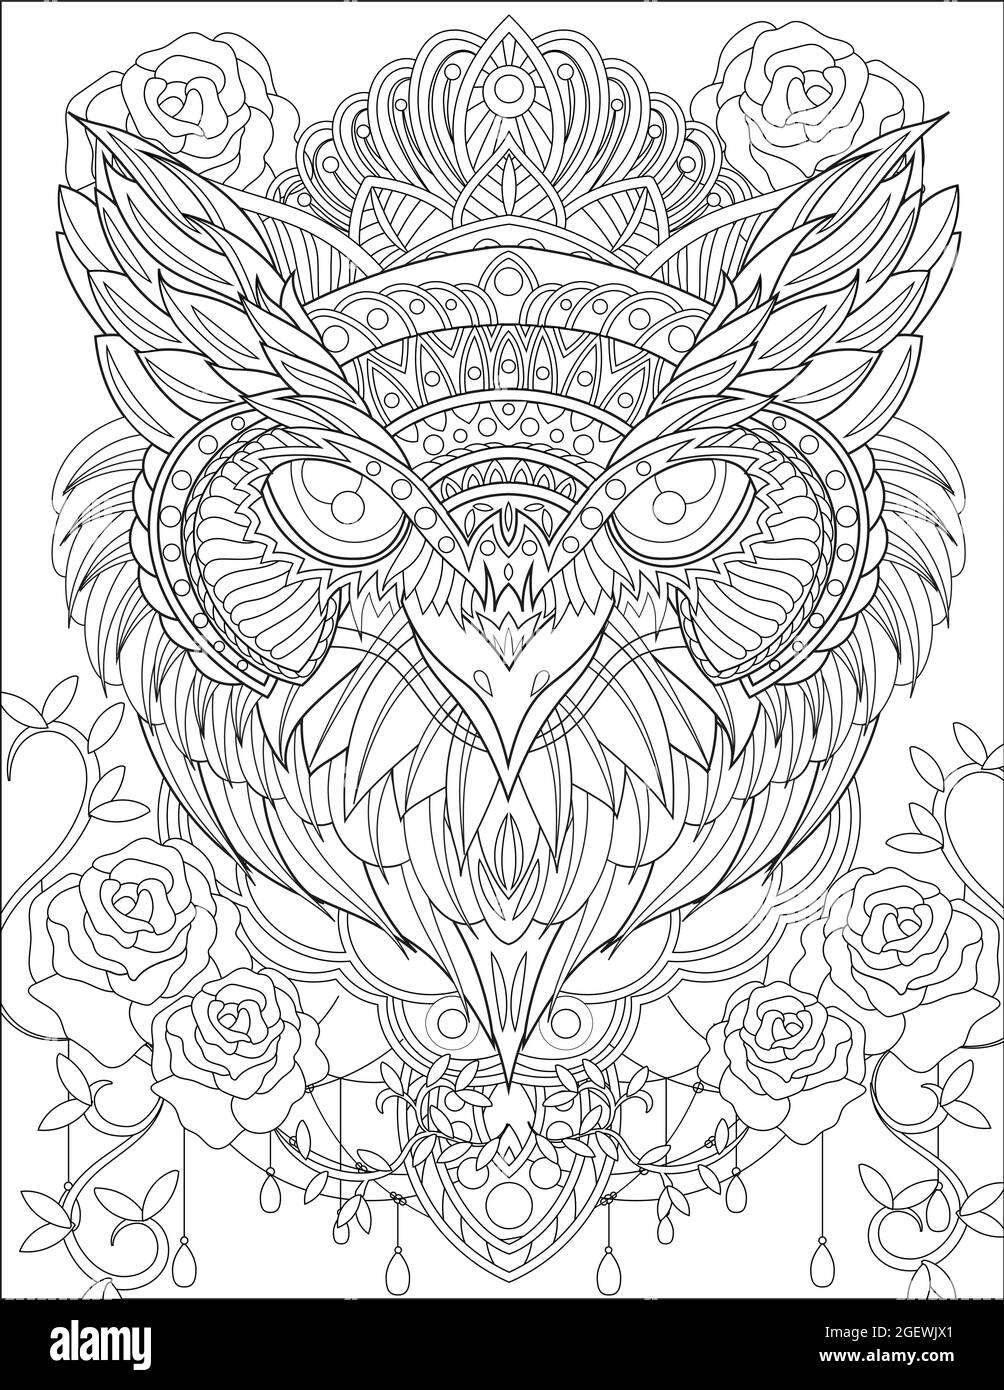 Close Up Owl Head With Crown Surrounding Rose Flowers Vines Colorless Line Drawing. Nightowl With Tiara Surrounded With Flower Facing Forward Coloring Stock Vector